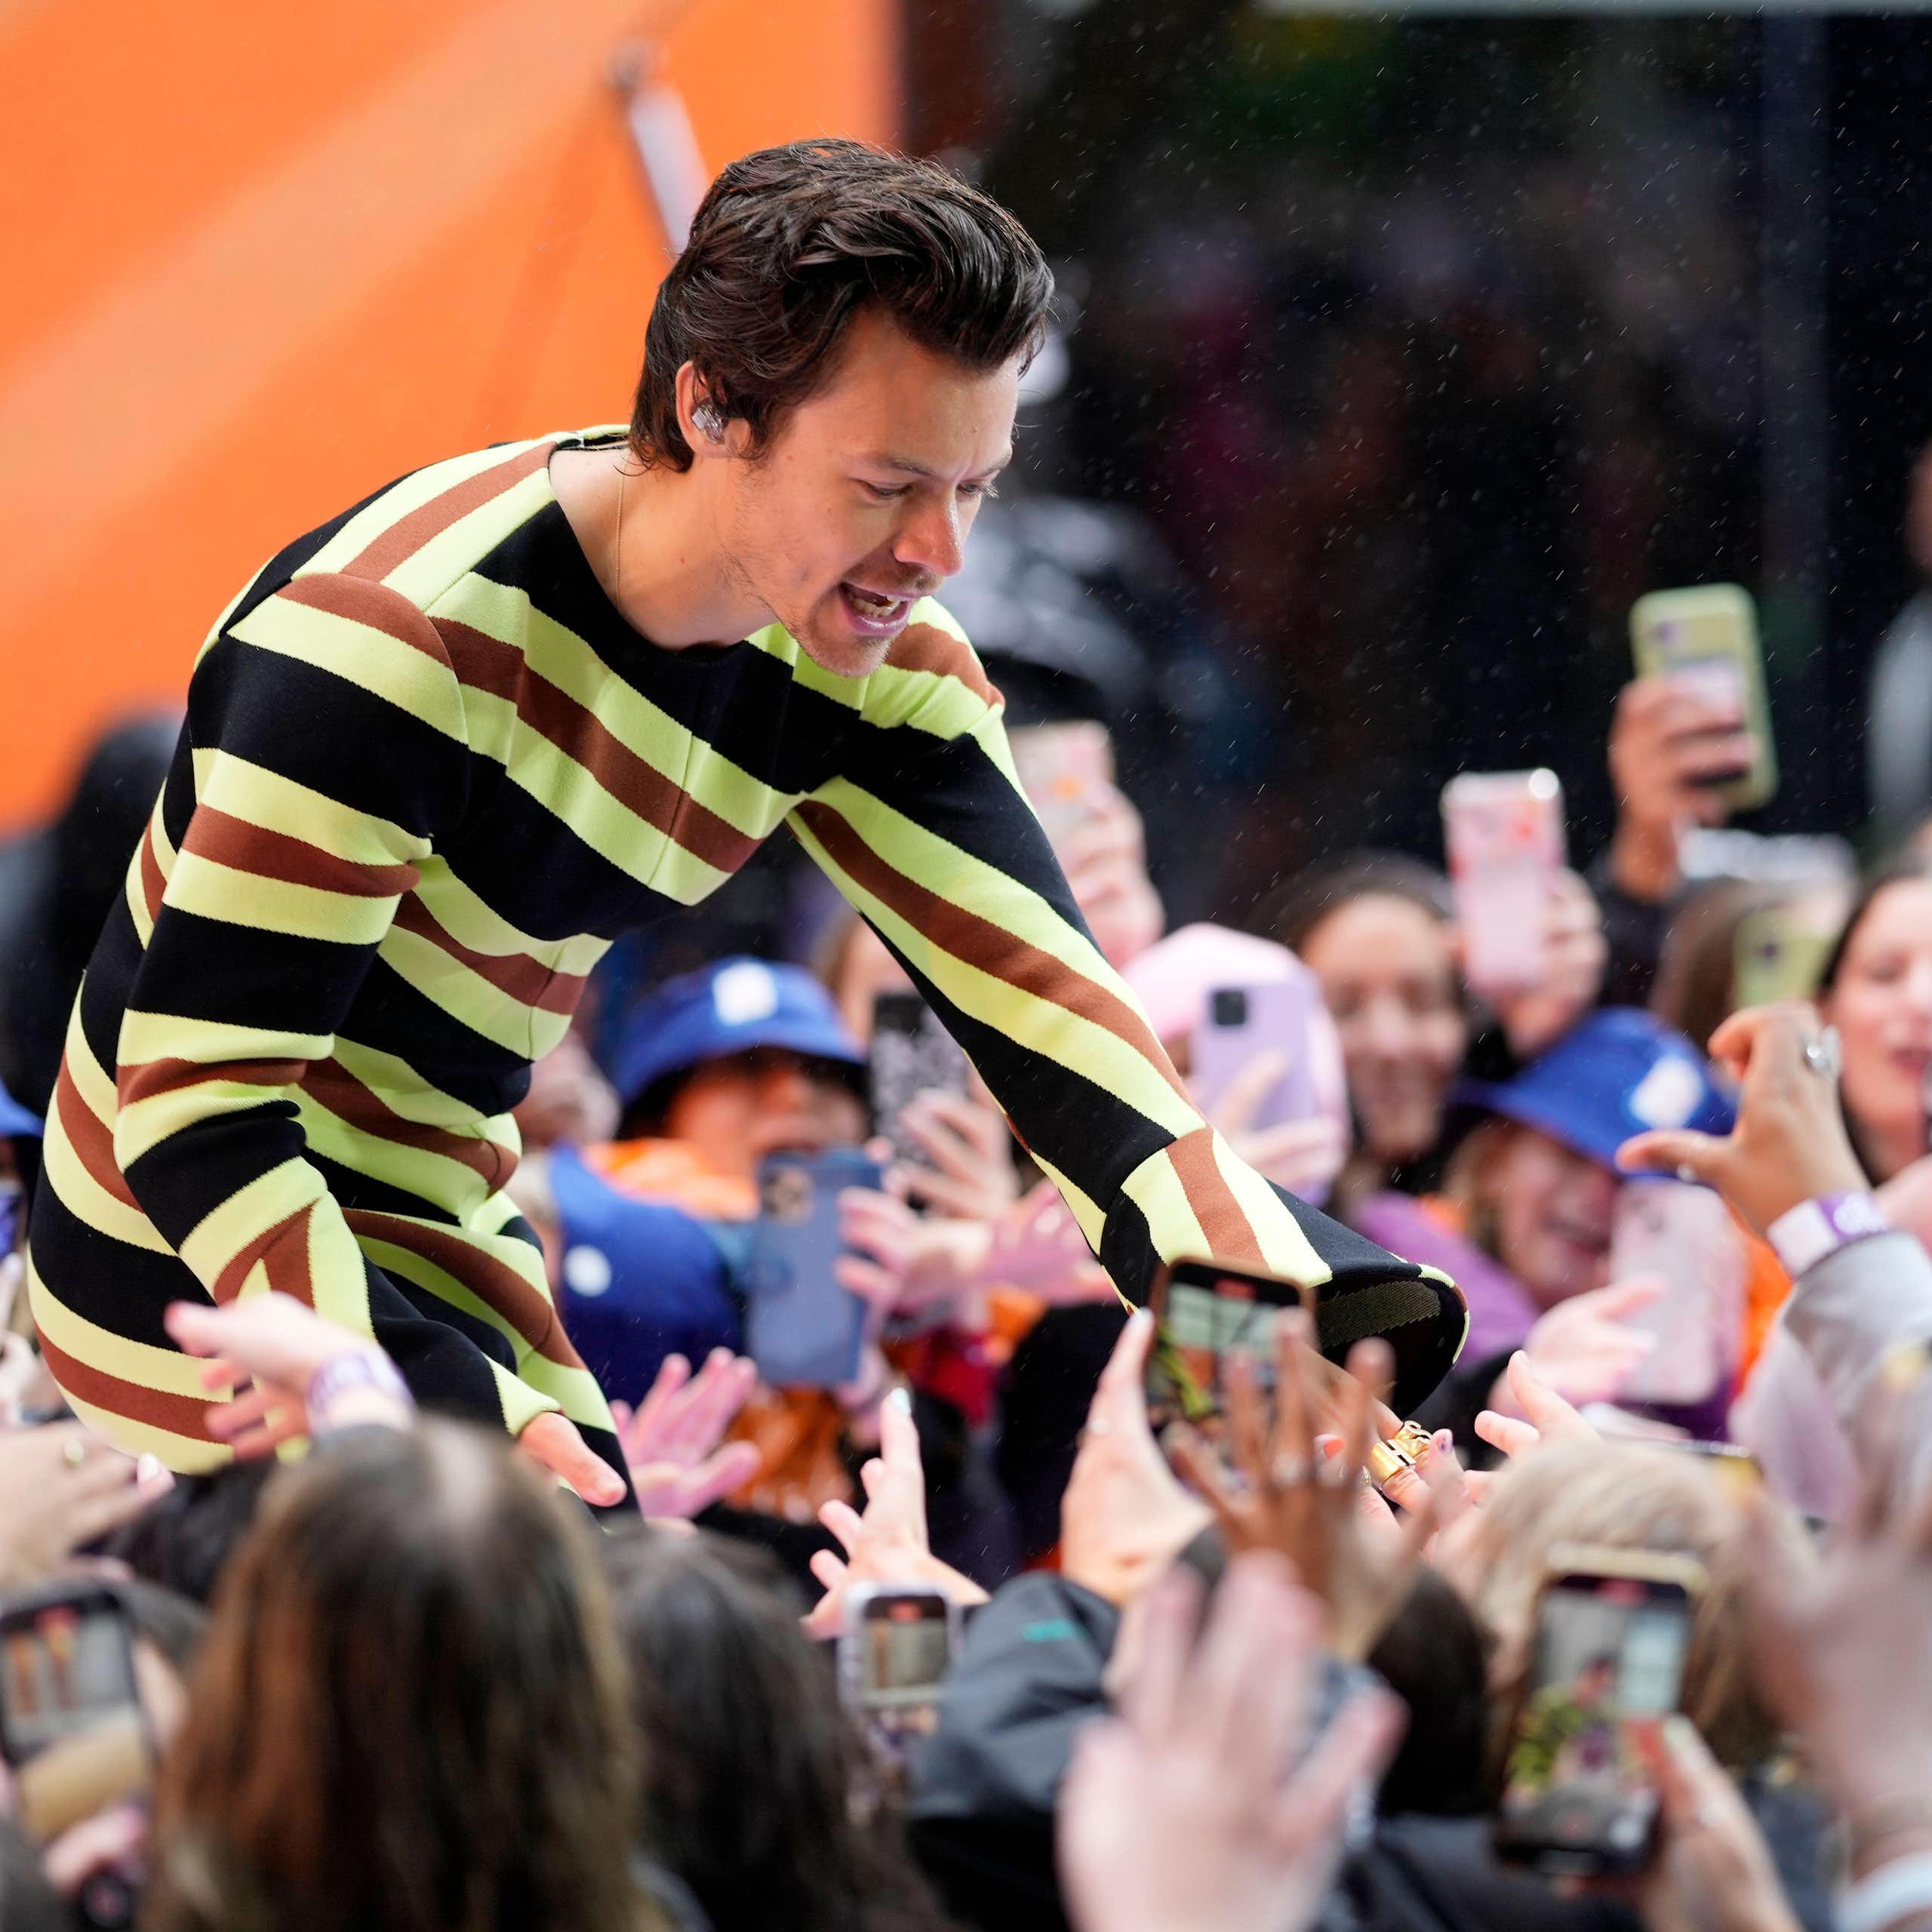 Singer Harry Styles, wearing a colourful striped jumpsuit, bends down from a stage to greet enthusiastic fans